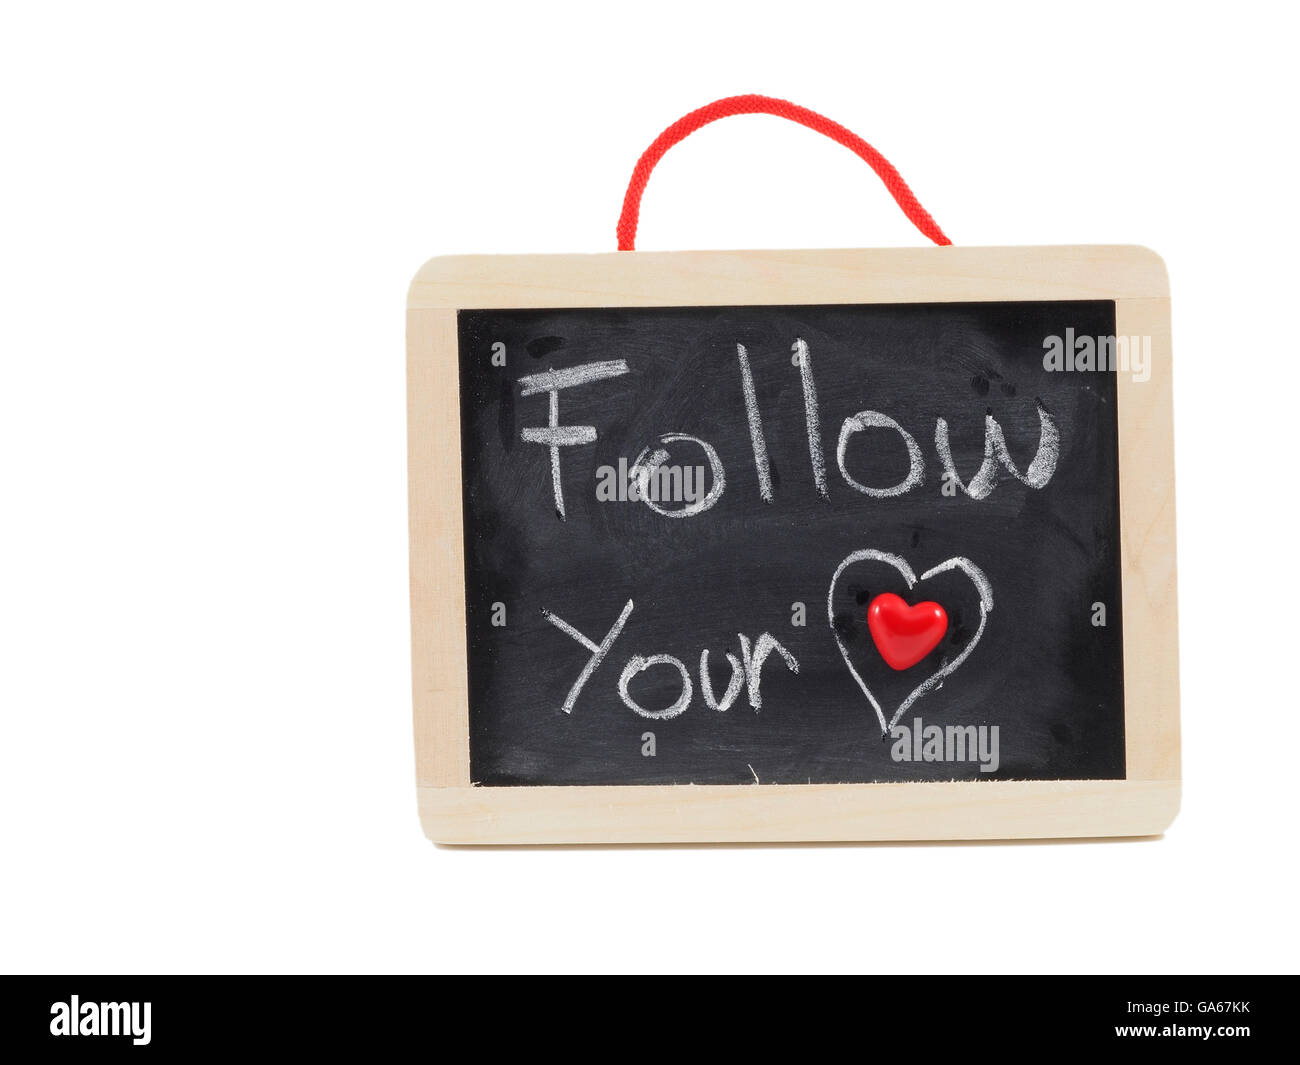 'Follow your heart' written on a wooden chalkboard using white chalk and a red tiny heart. Stock Photo